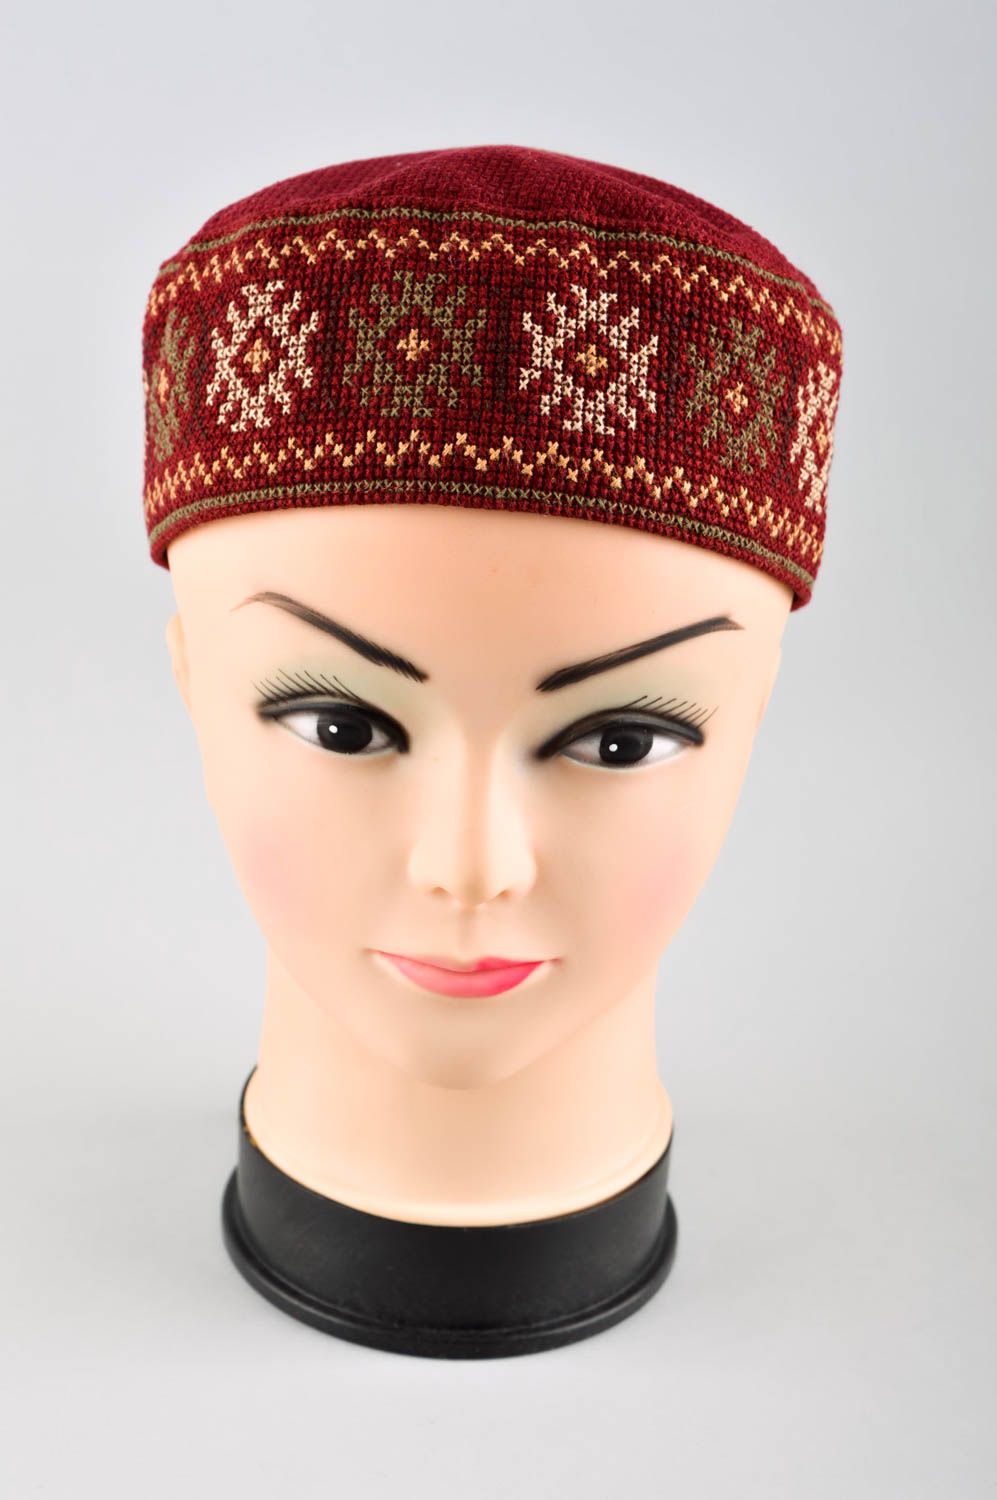 Red handmade fabric hat textile hat for men head accessories gifts for him photo 2